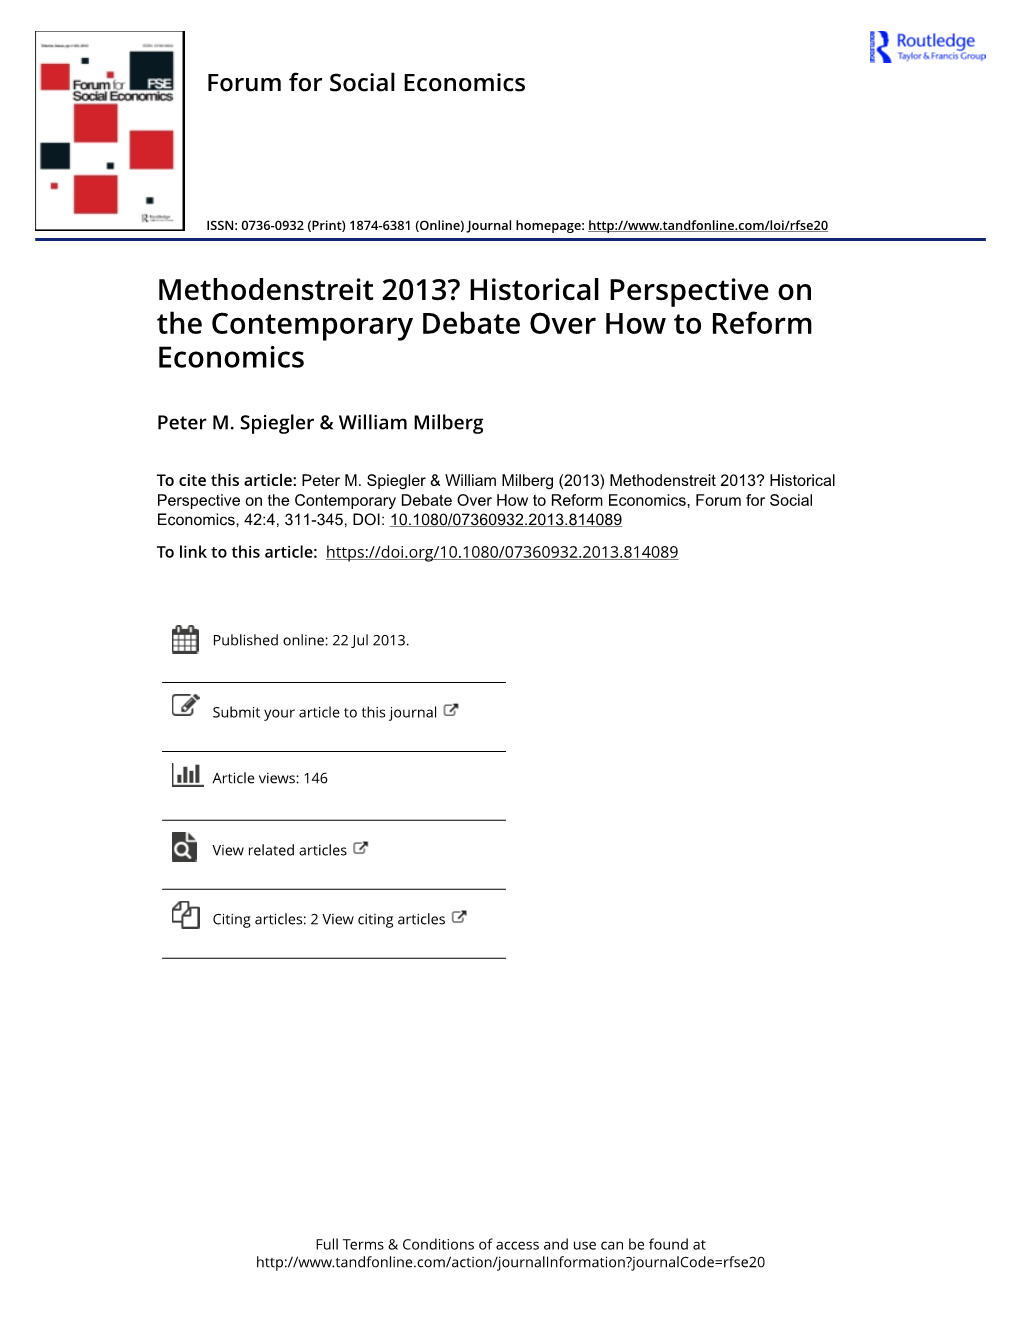 Methodenstreit 2013? Historical Perspective on the Contemporary Debate Over How to Reform Economics